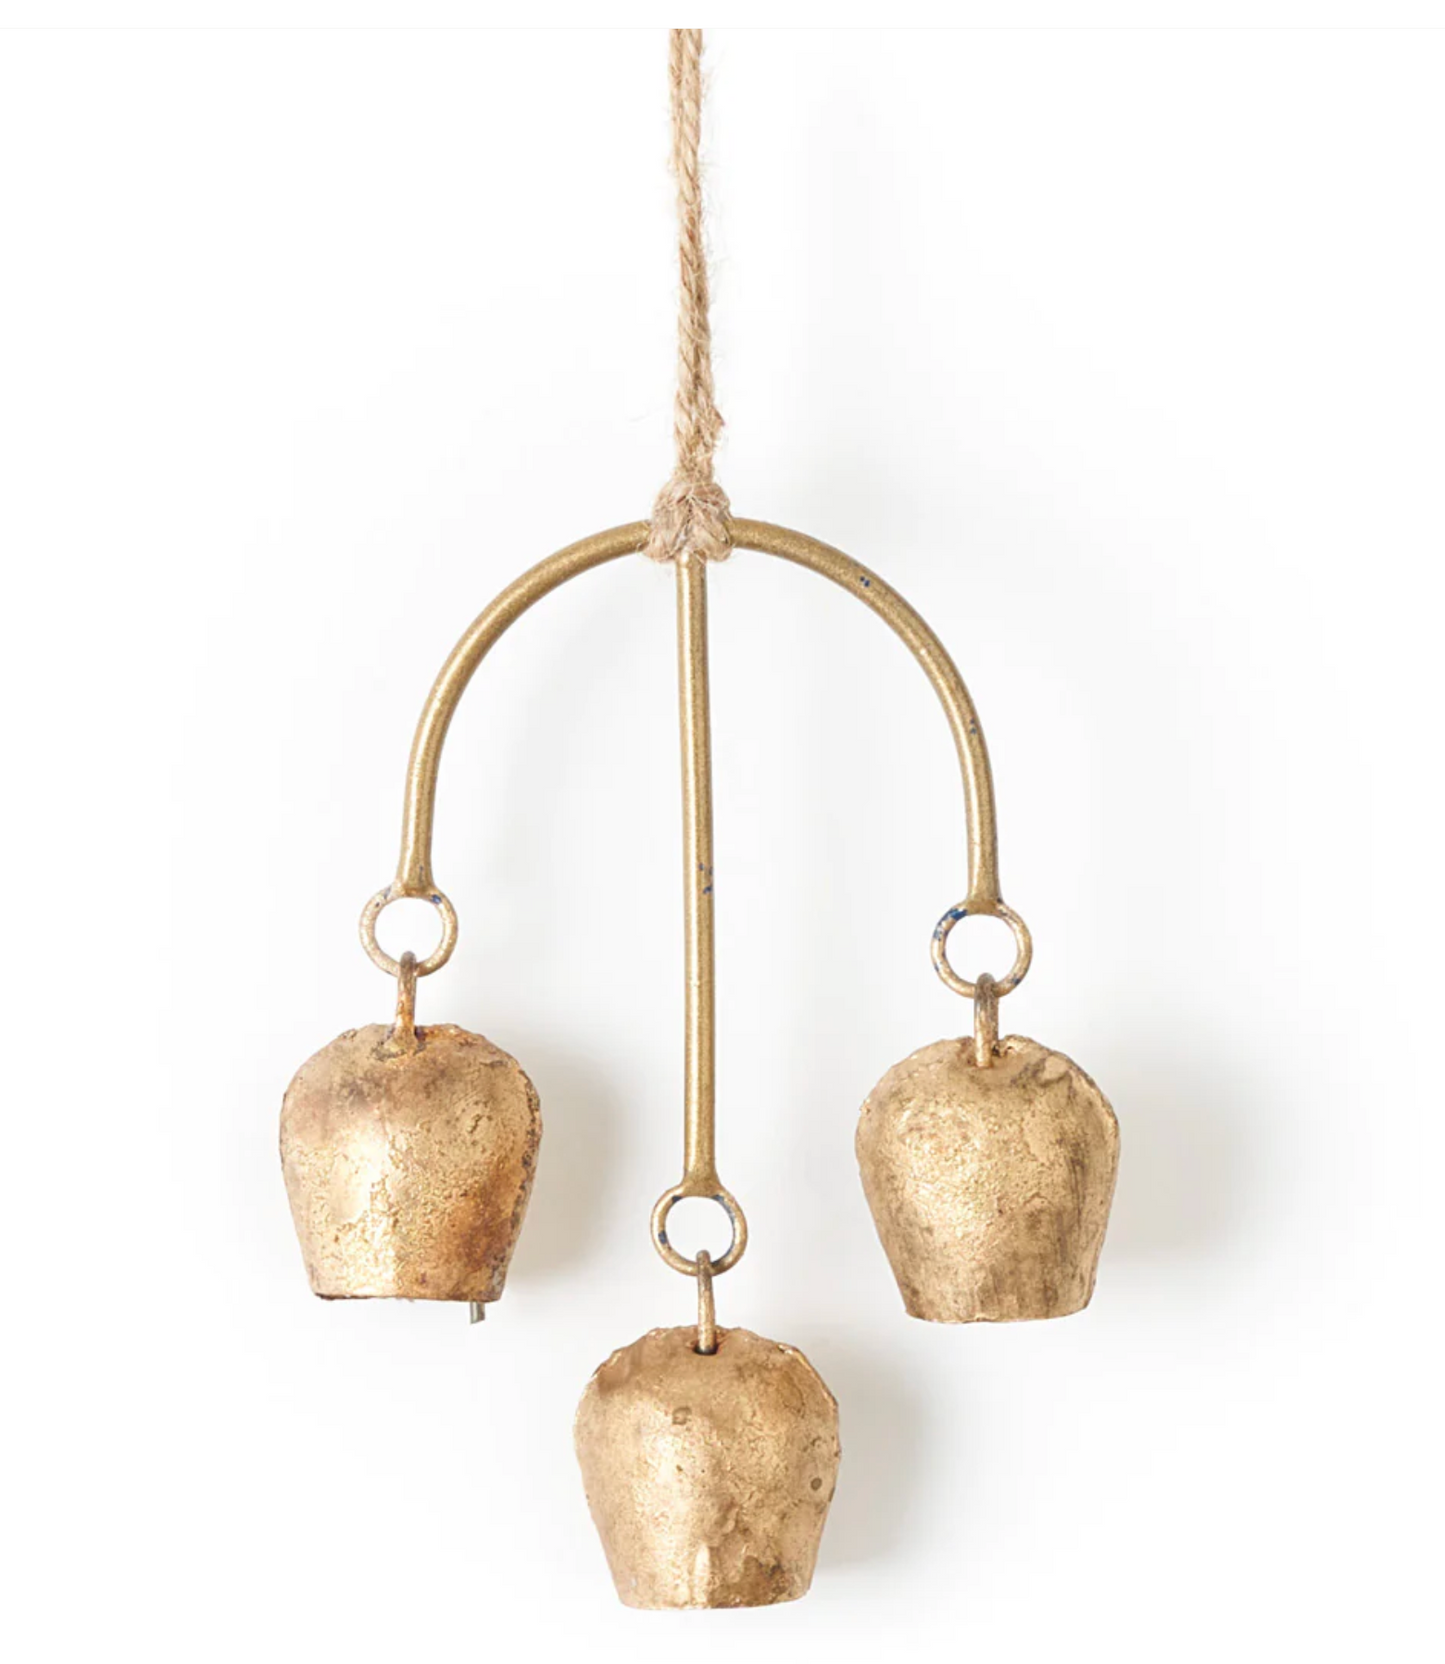 Tridevi Three Prong Rustic Bell Chime